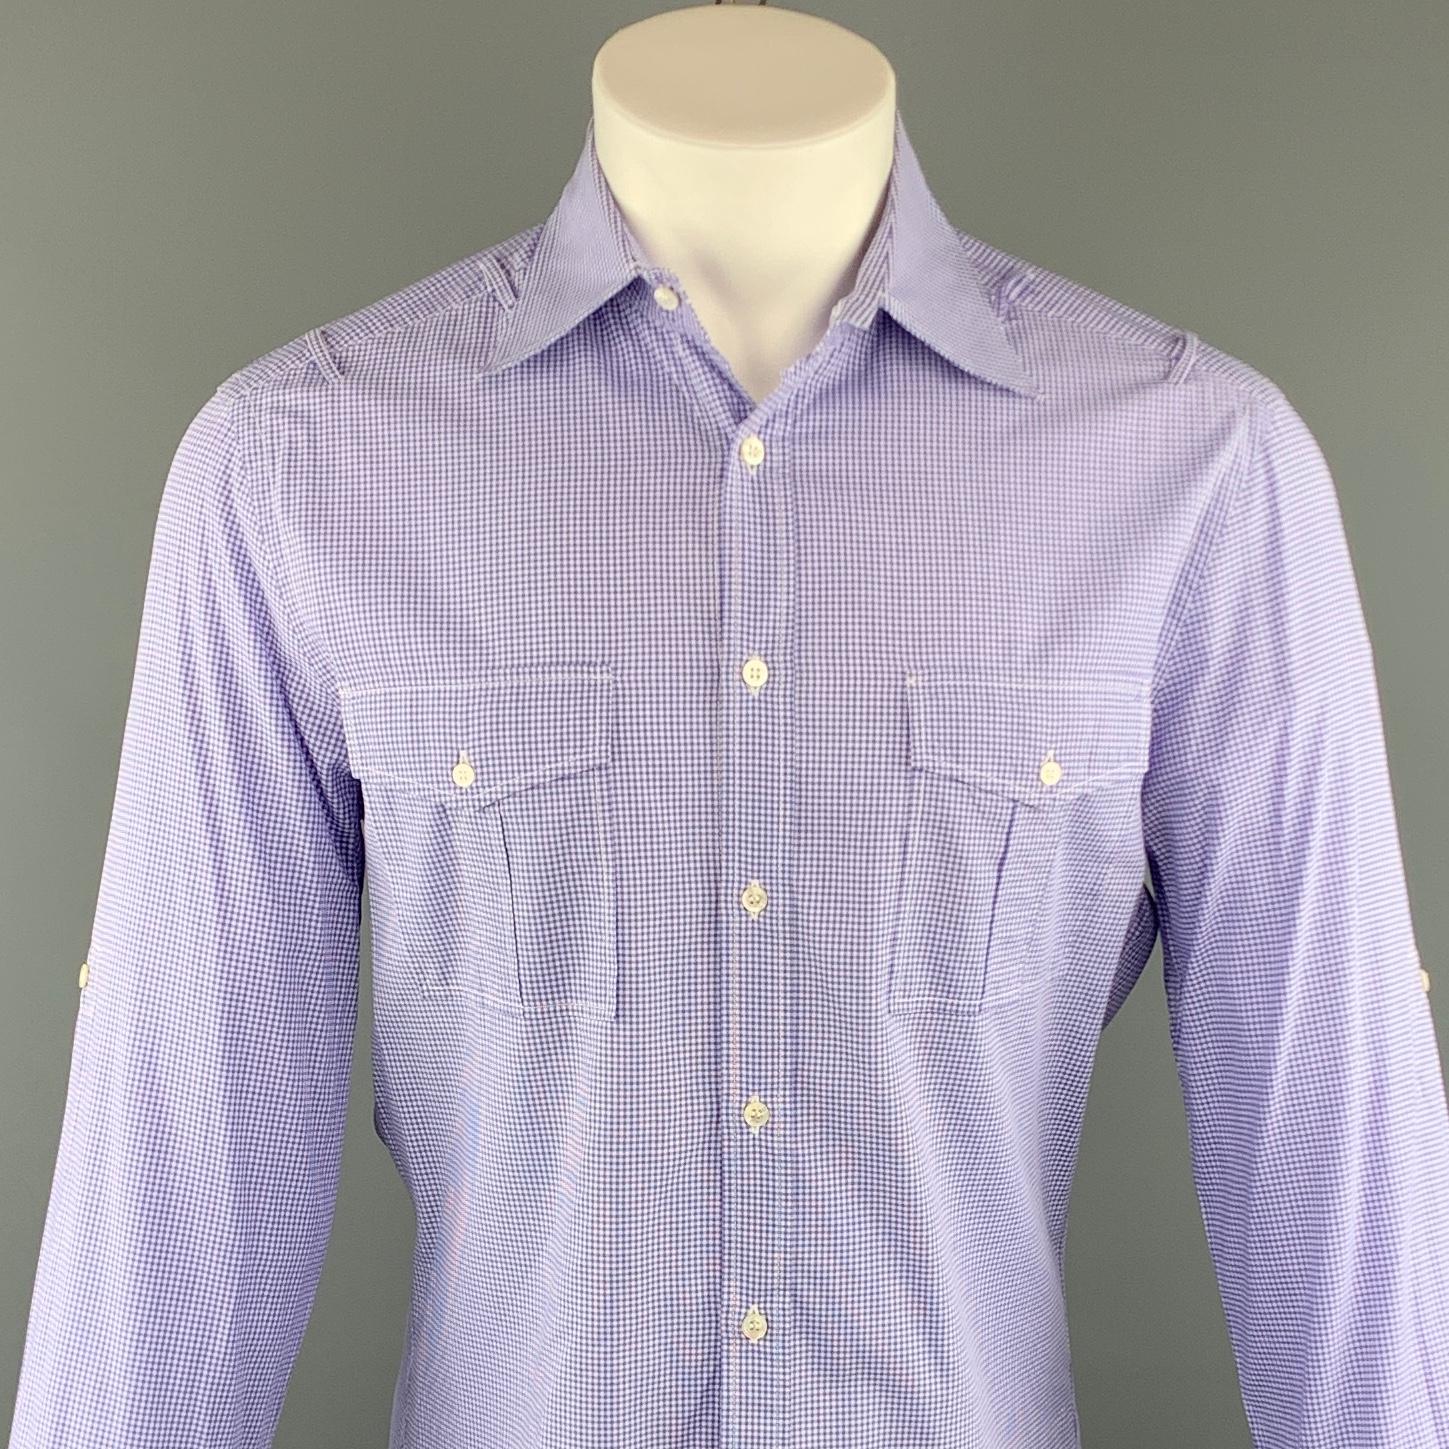 MICHAEL BASTIAN long sleeve shirt comes in a purple checkered cotton featuring a button up style, shoulder loop details, and front patch pockets. Made in Italy.
 
Excellent Pre-Owned Condition.
Marked: 40
 
Measurements:
 
Shoulder: 17.5 in.
Chest: